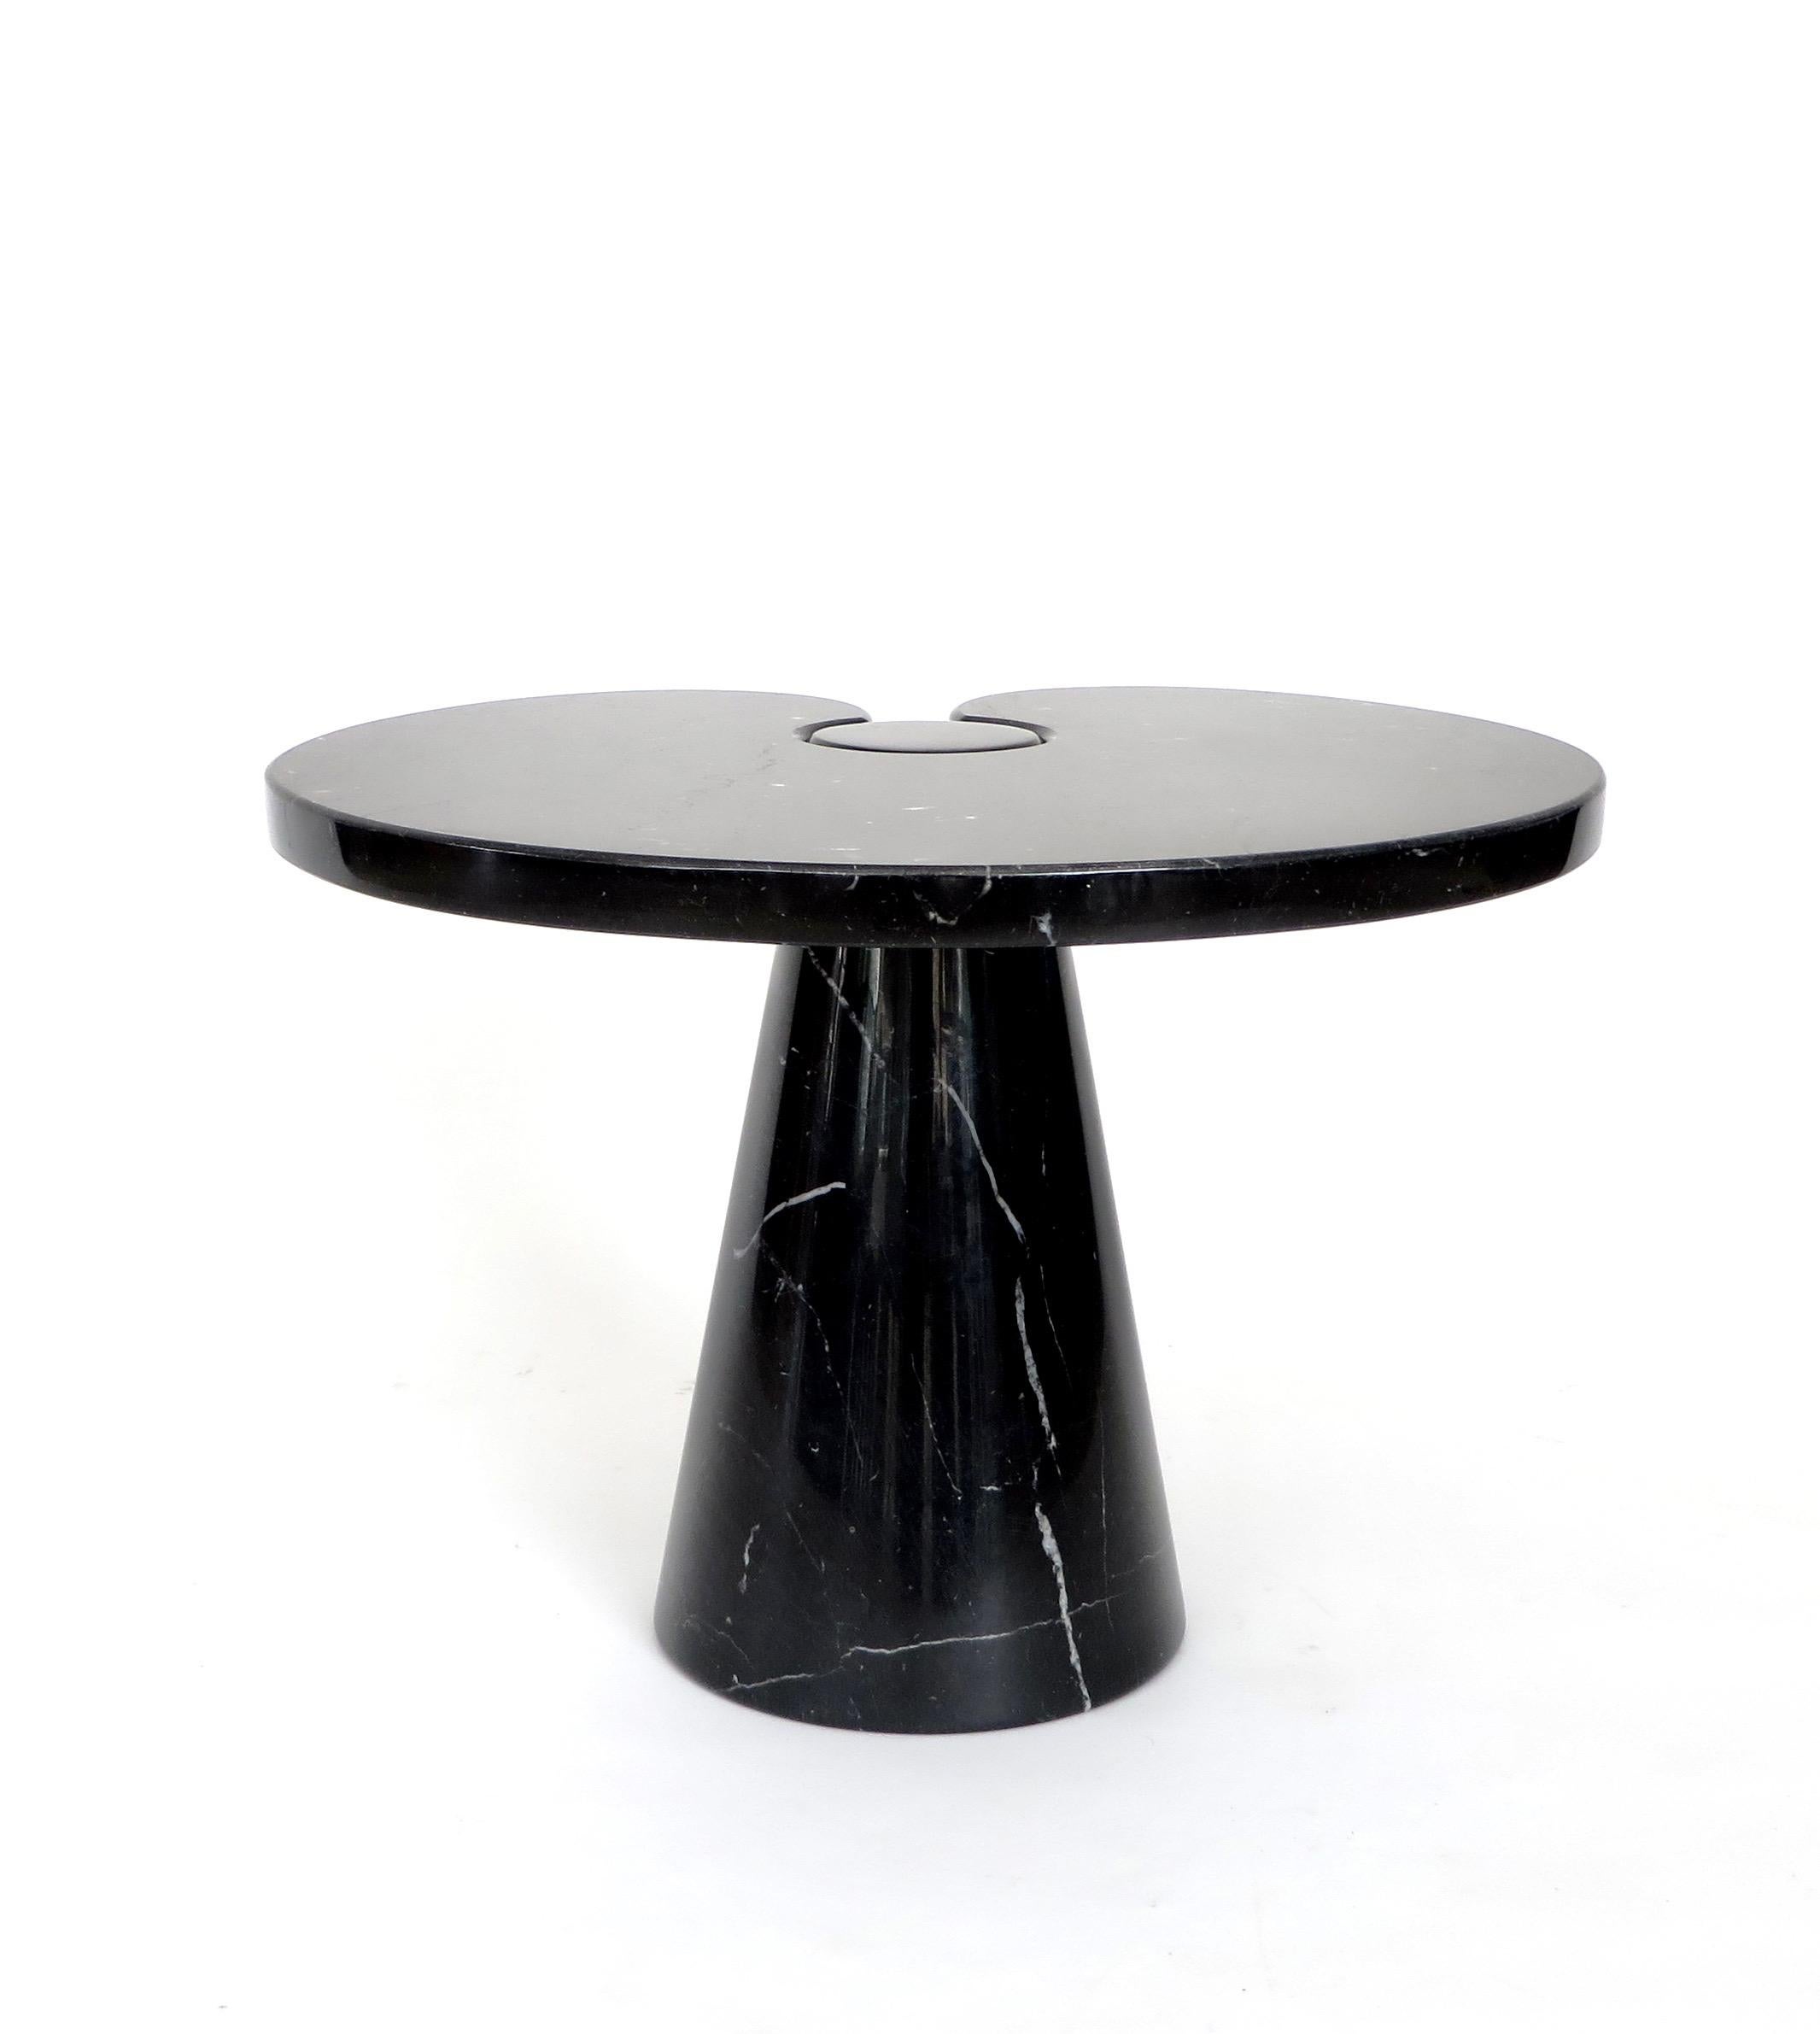 Italian Angelo Mangiarotti vintage low Eros side table in Marquina Nero marble.
Mangiarotti was an expert at the highly sculptural use of marble in the entire Eros collection.
Each piece was conceived to be a piece of classical lasting sculpture